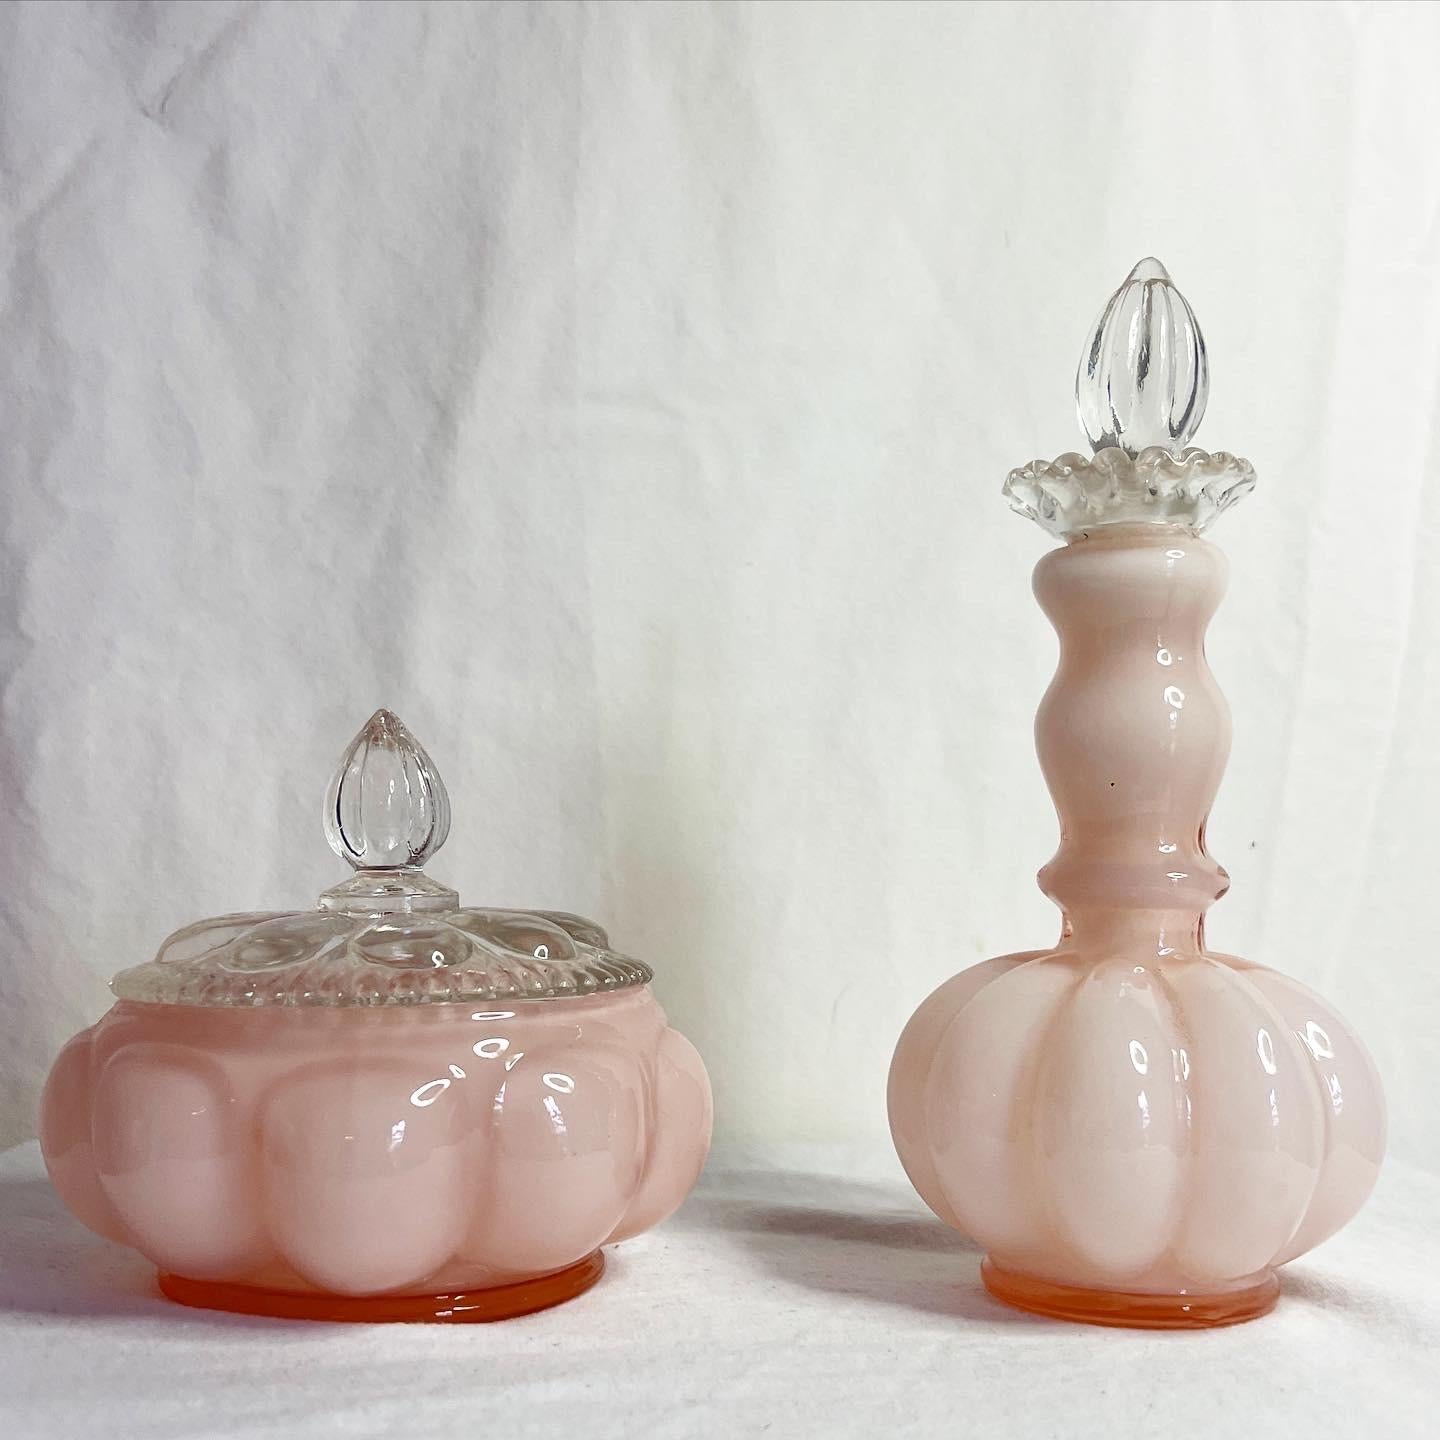 Amazing set of 2 Fenton glass object. Set contains one powder jar and one tall perfume bottle. Displays a Mellon pink glass.

Dish measures: 4.5” W, 4.5” D, 4” H
Bottle measures: 3.25” W, 3.25” D, 7” H.